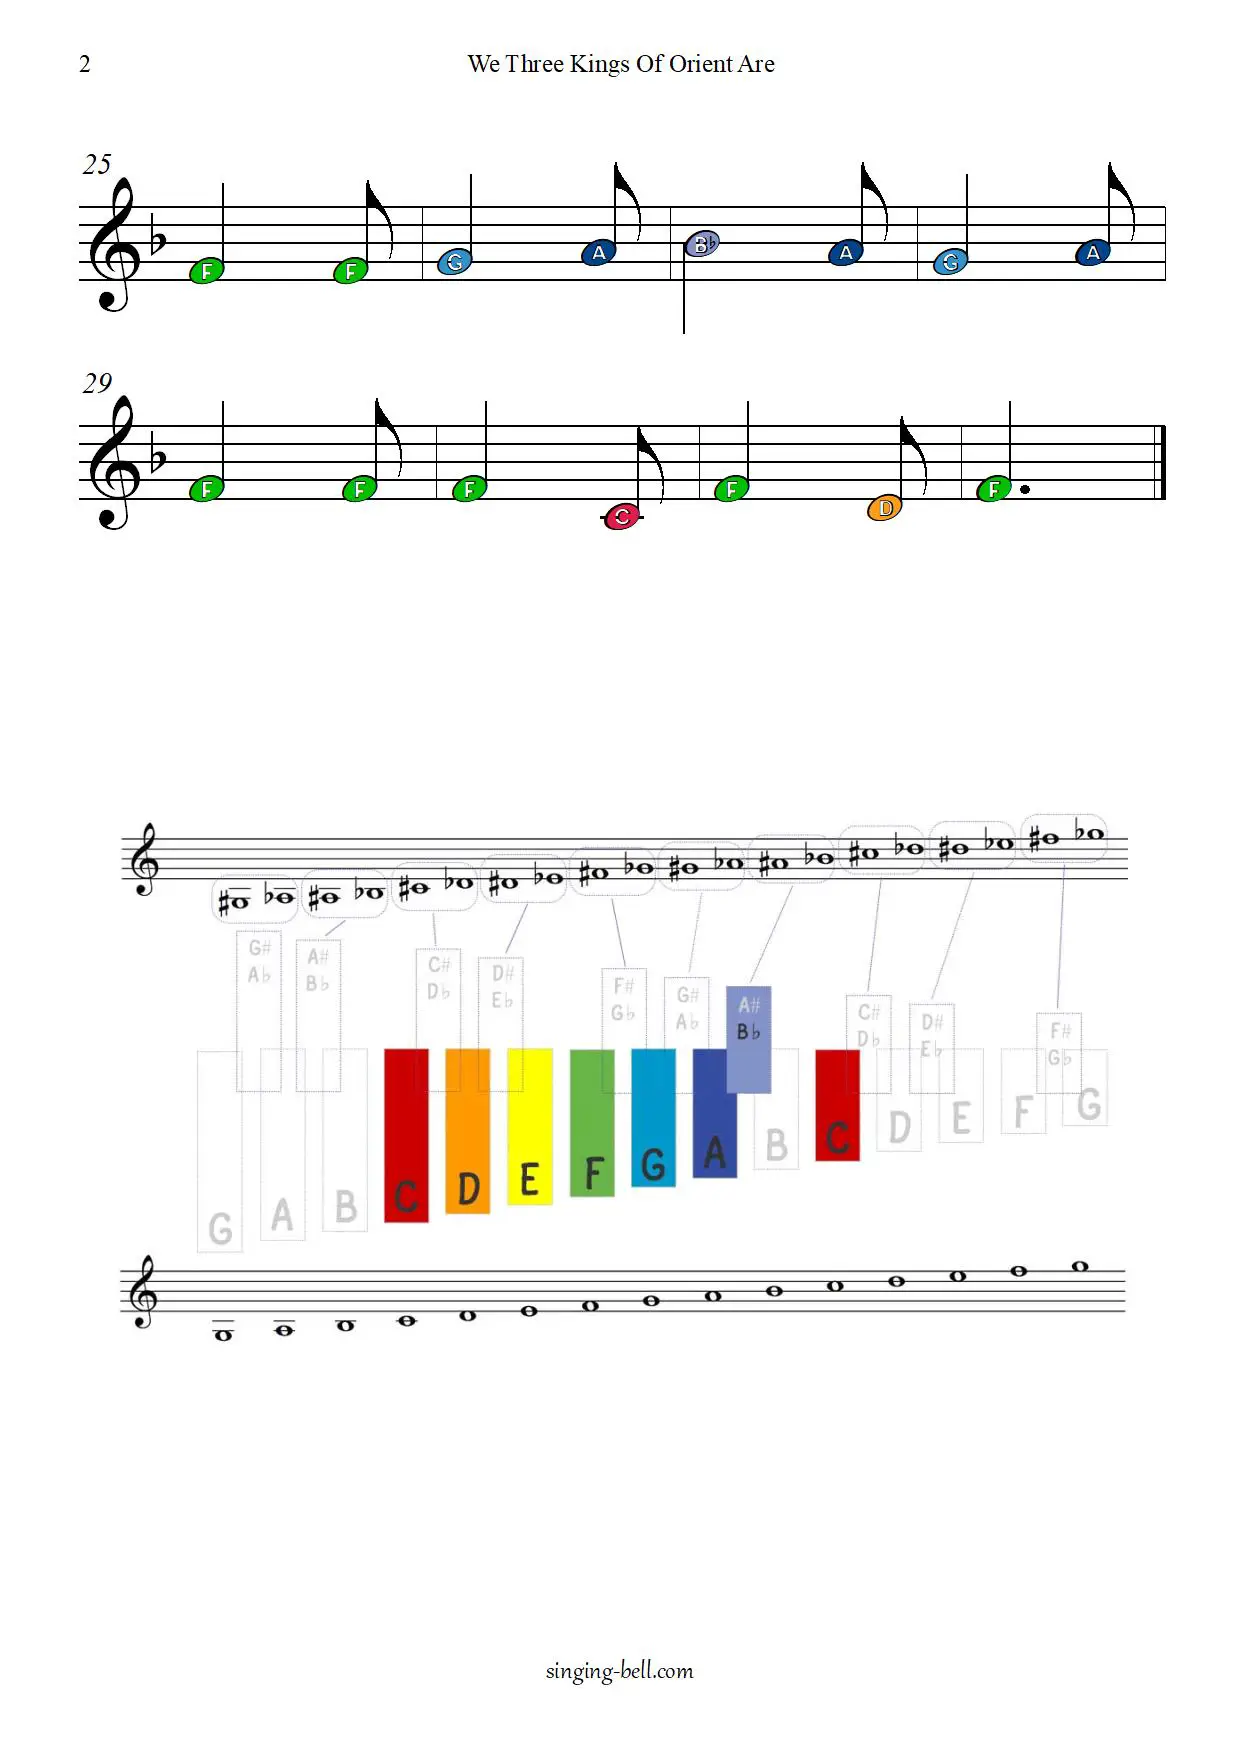 We Three Kings free xylophone glockenspiel sheet music color notes chart pdf p.2